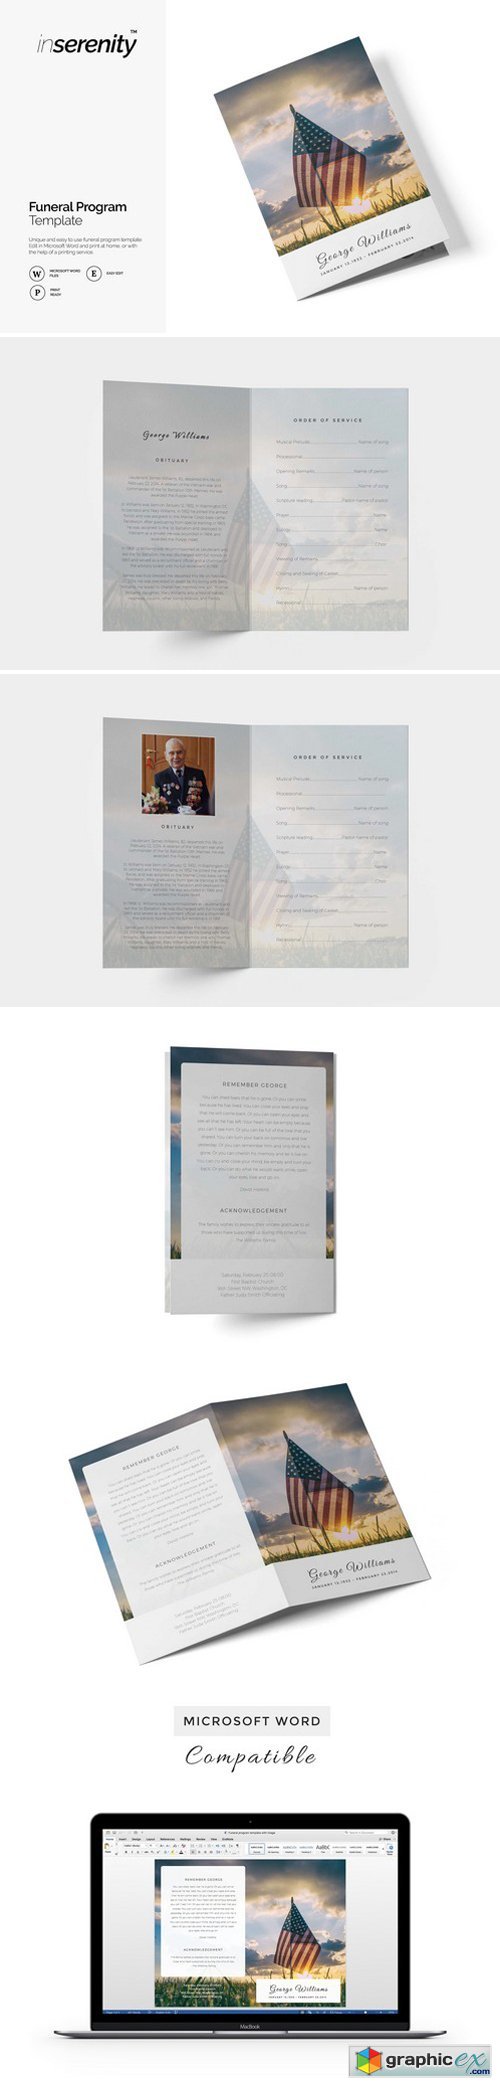 Military funeral program template